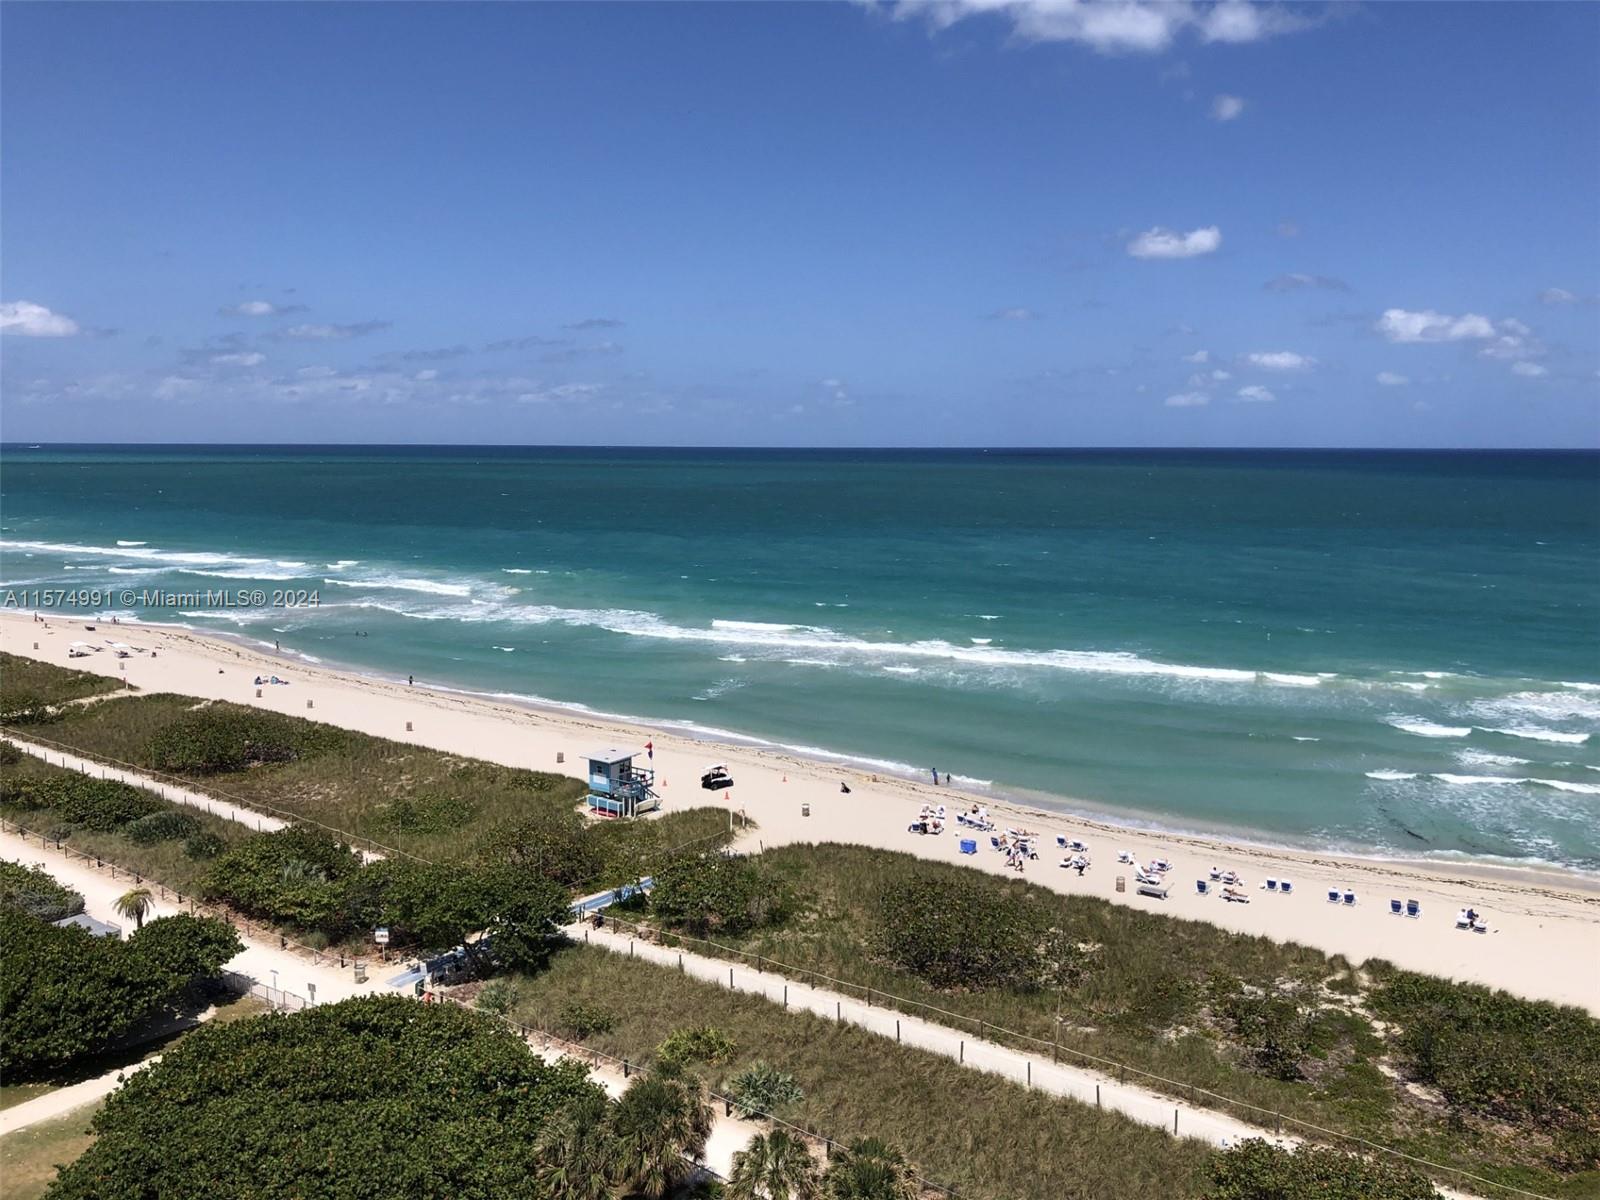 Fantastic sunrise, ocean and beach views. This 2/2 apartment has tile floors, washer and dryer inside the unit and one covered parking space. Building has 24/7 lobby attendant, cable, high speed internet, heated pool, gym and direct beach access. Fabulous location near Bal Harbour shops, restaurants, worship houses, supermarket and next door to Surfside Community Center. This is a yearly rent!